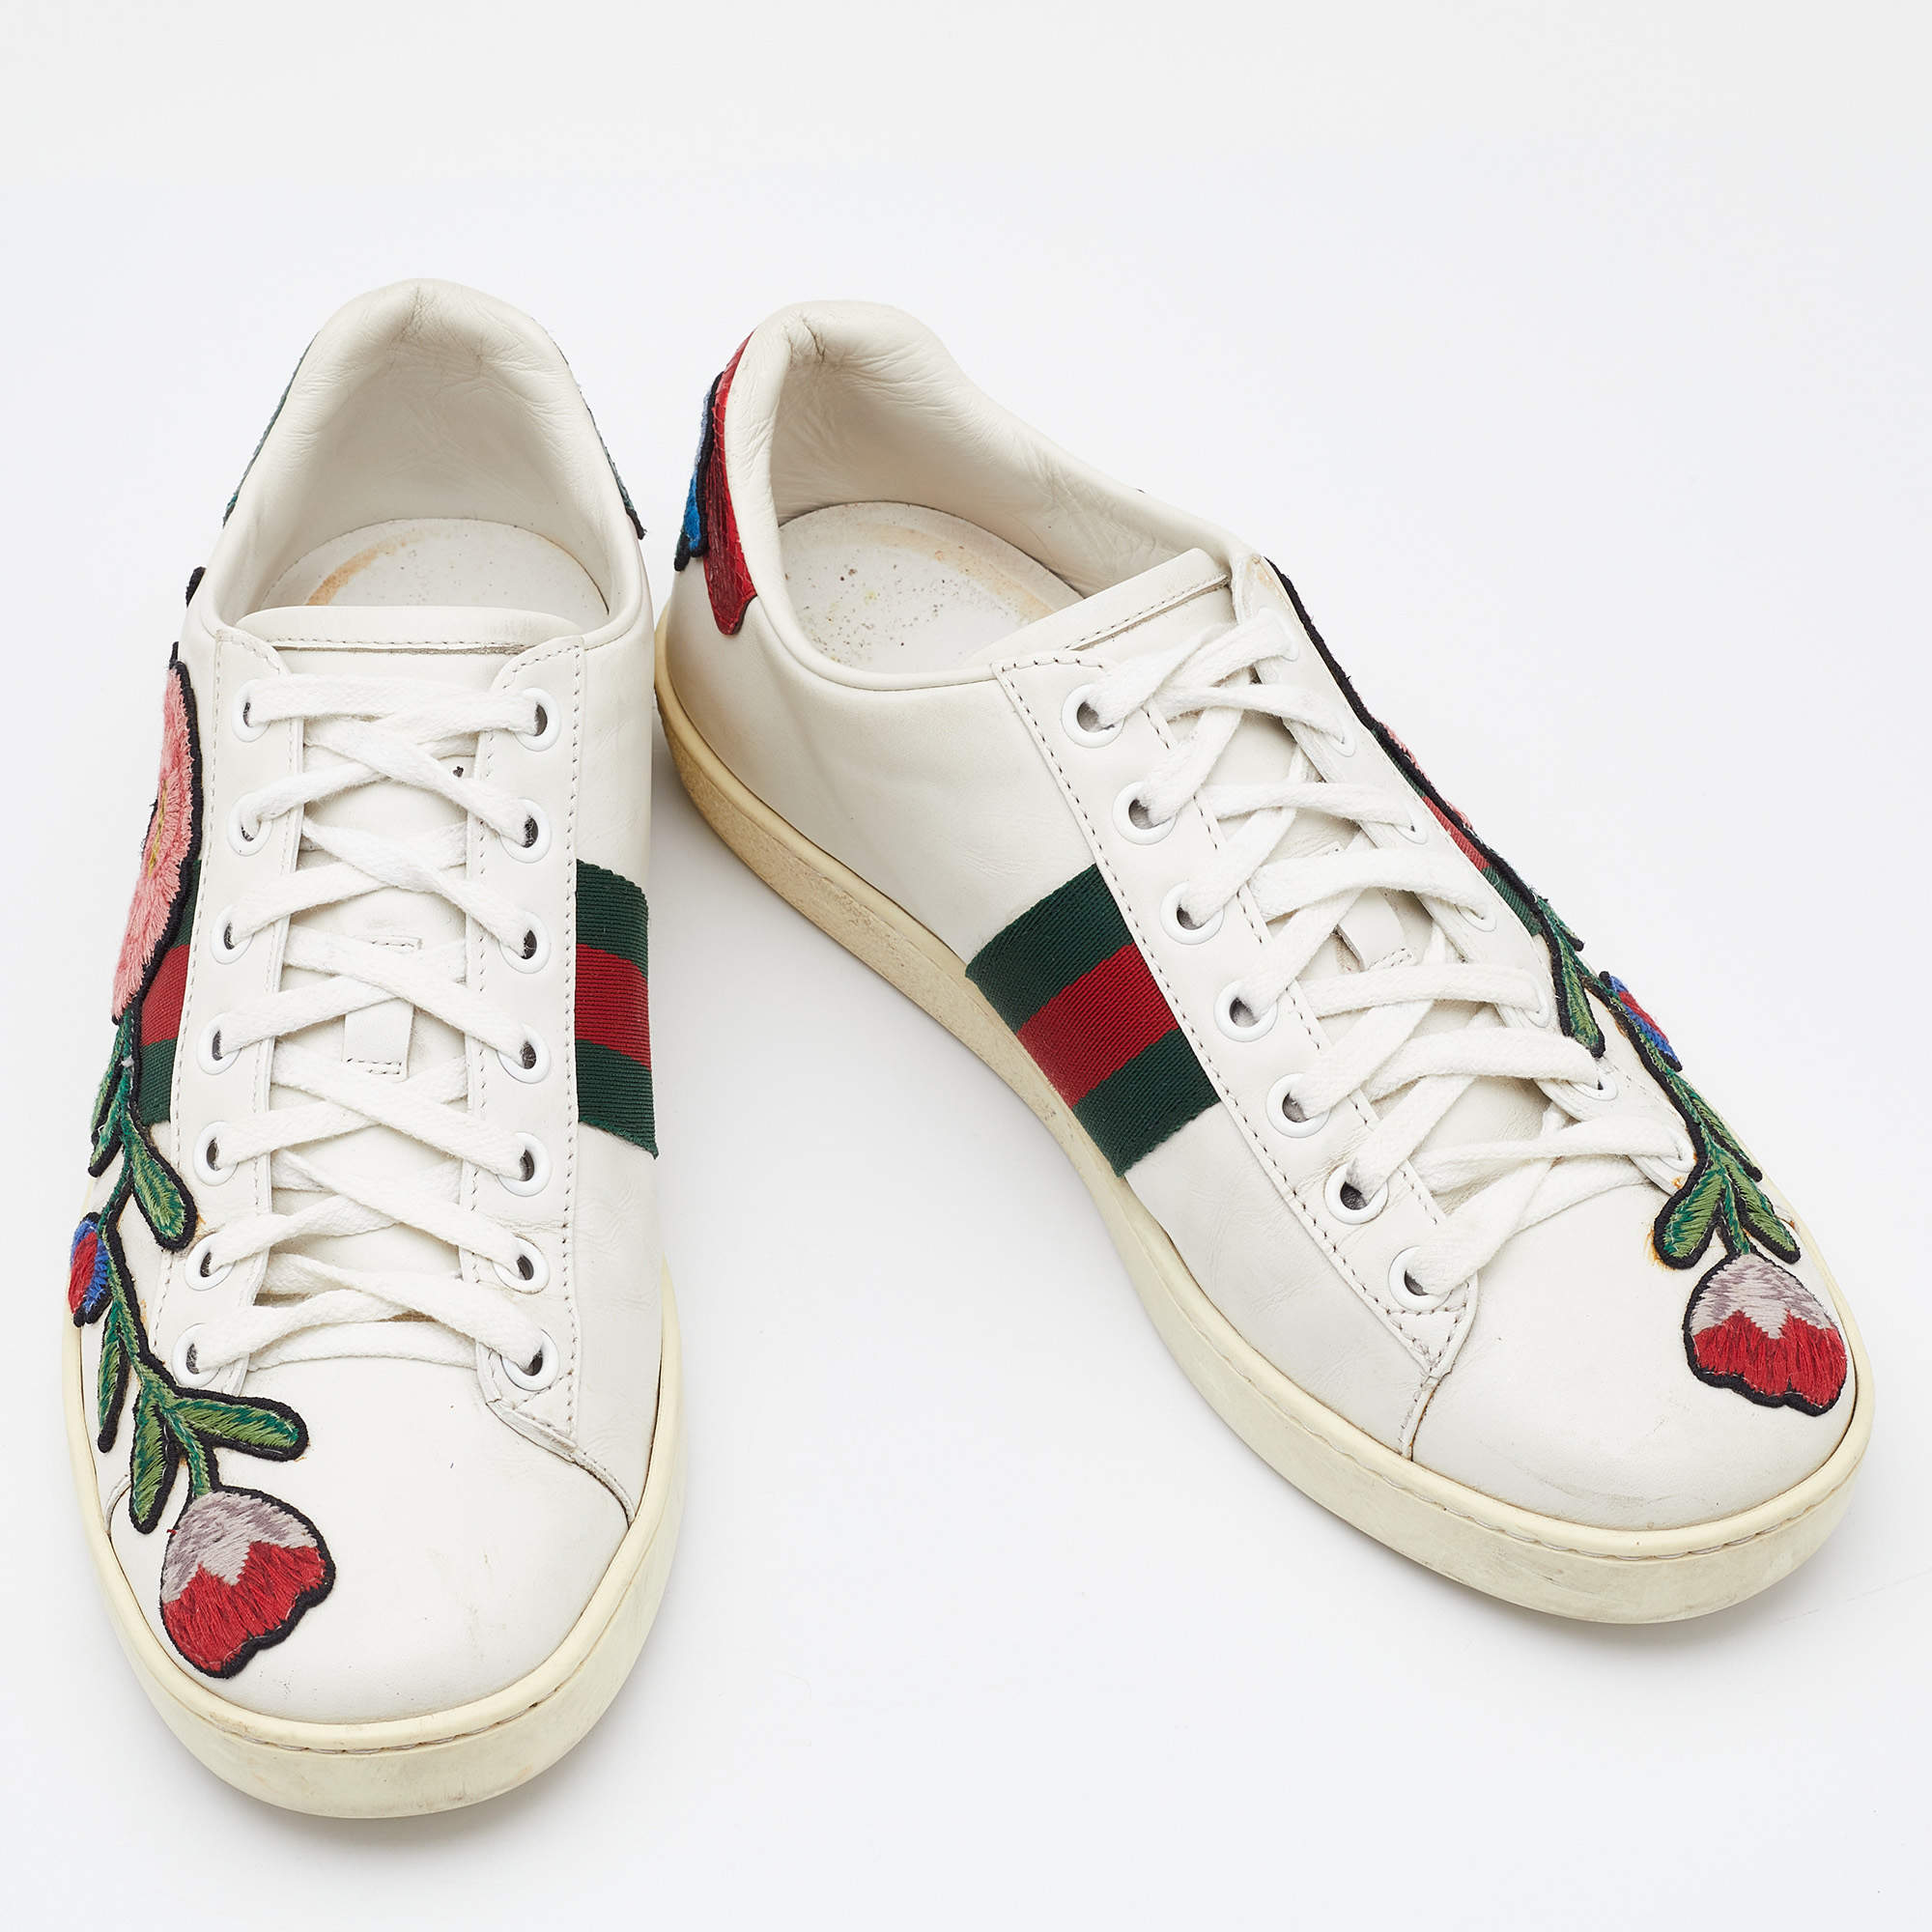 GUCCI Sneakers ACE Web Floral Embroidered White Leather 36 US 6 Women's $795